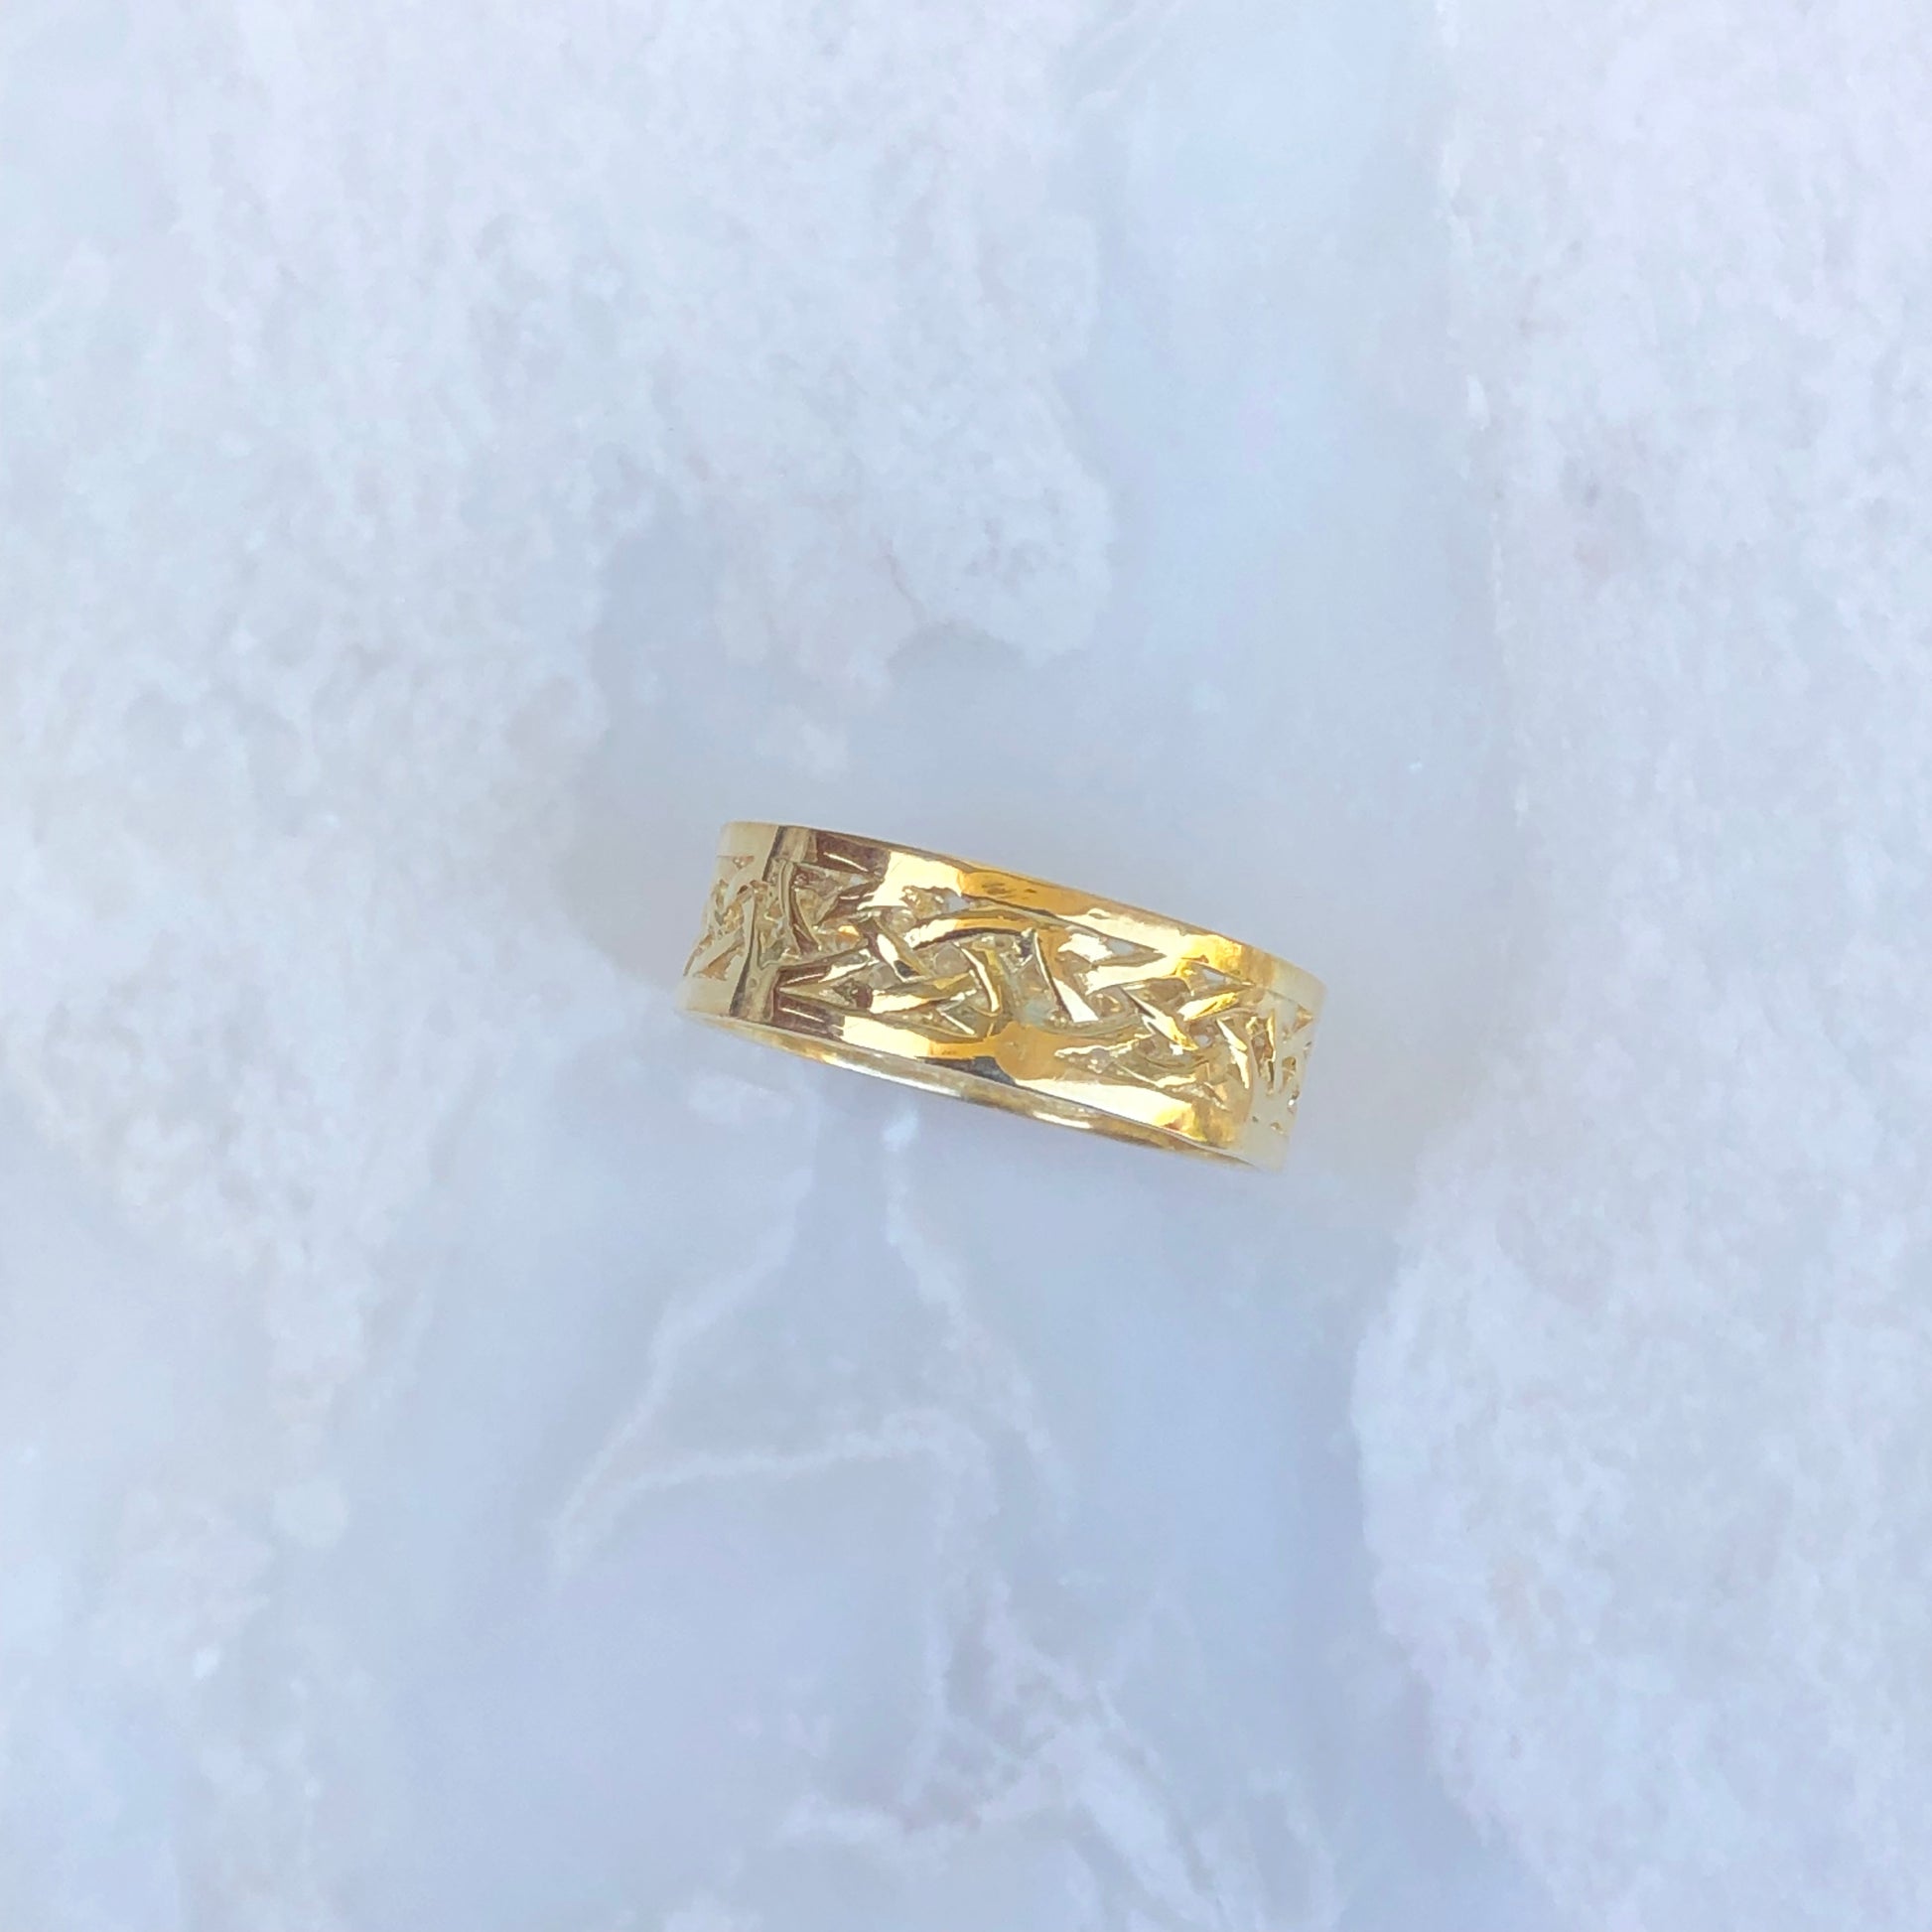 14KT Yellow Gold Celtic Weave Band Ring Size 7.25, 14KT Yellow Gold Celtic Weave Band Ring Size 7.25 - Legacy Saint Jewelry